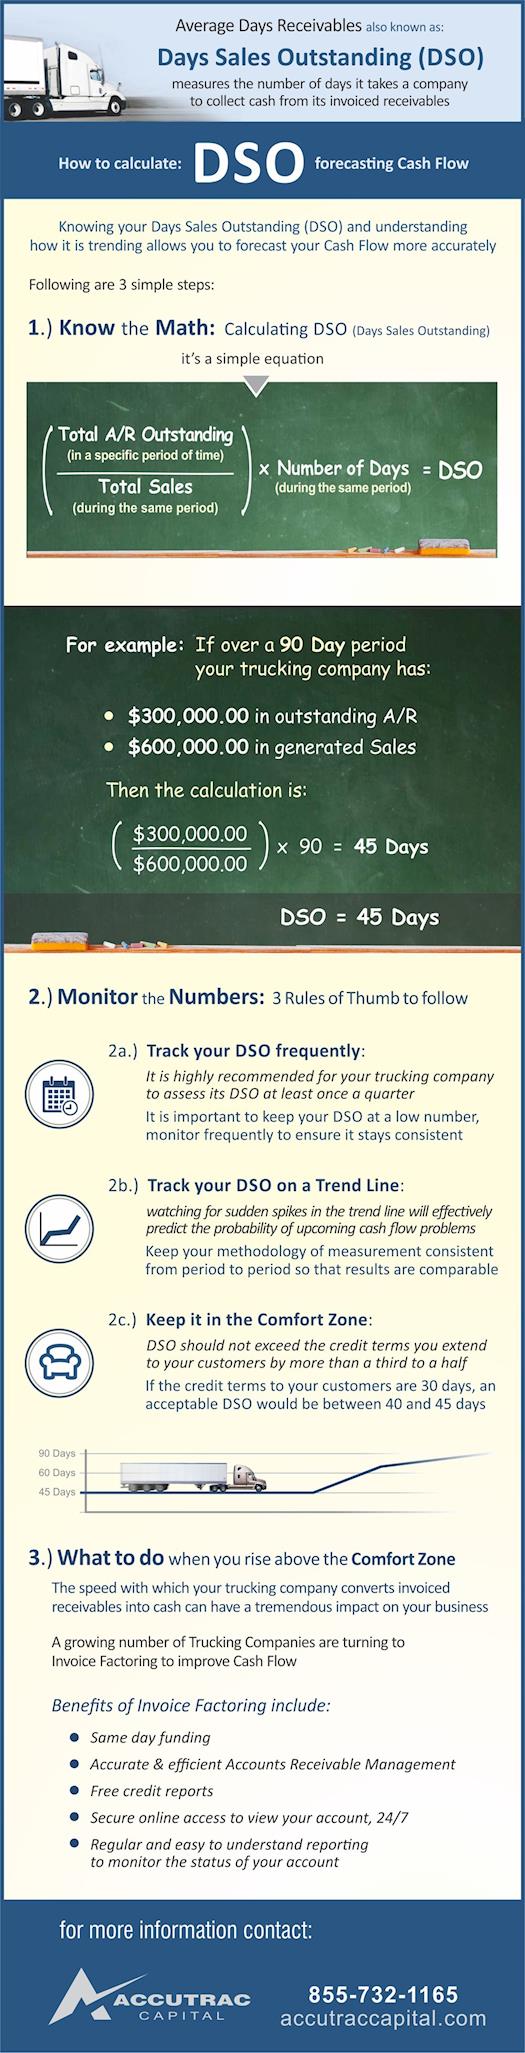 How To Calculate DSO For Your Trucking Company